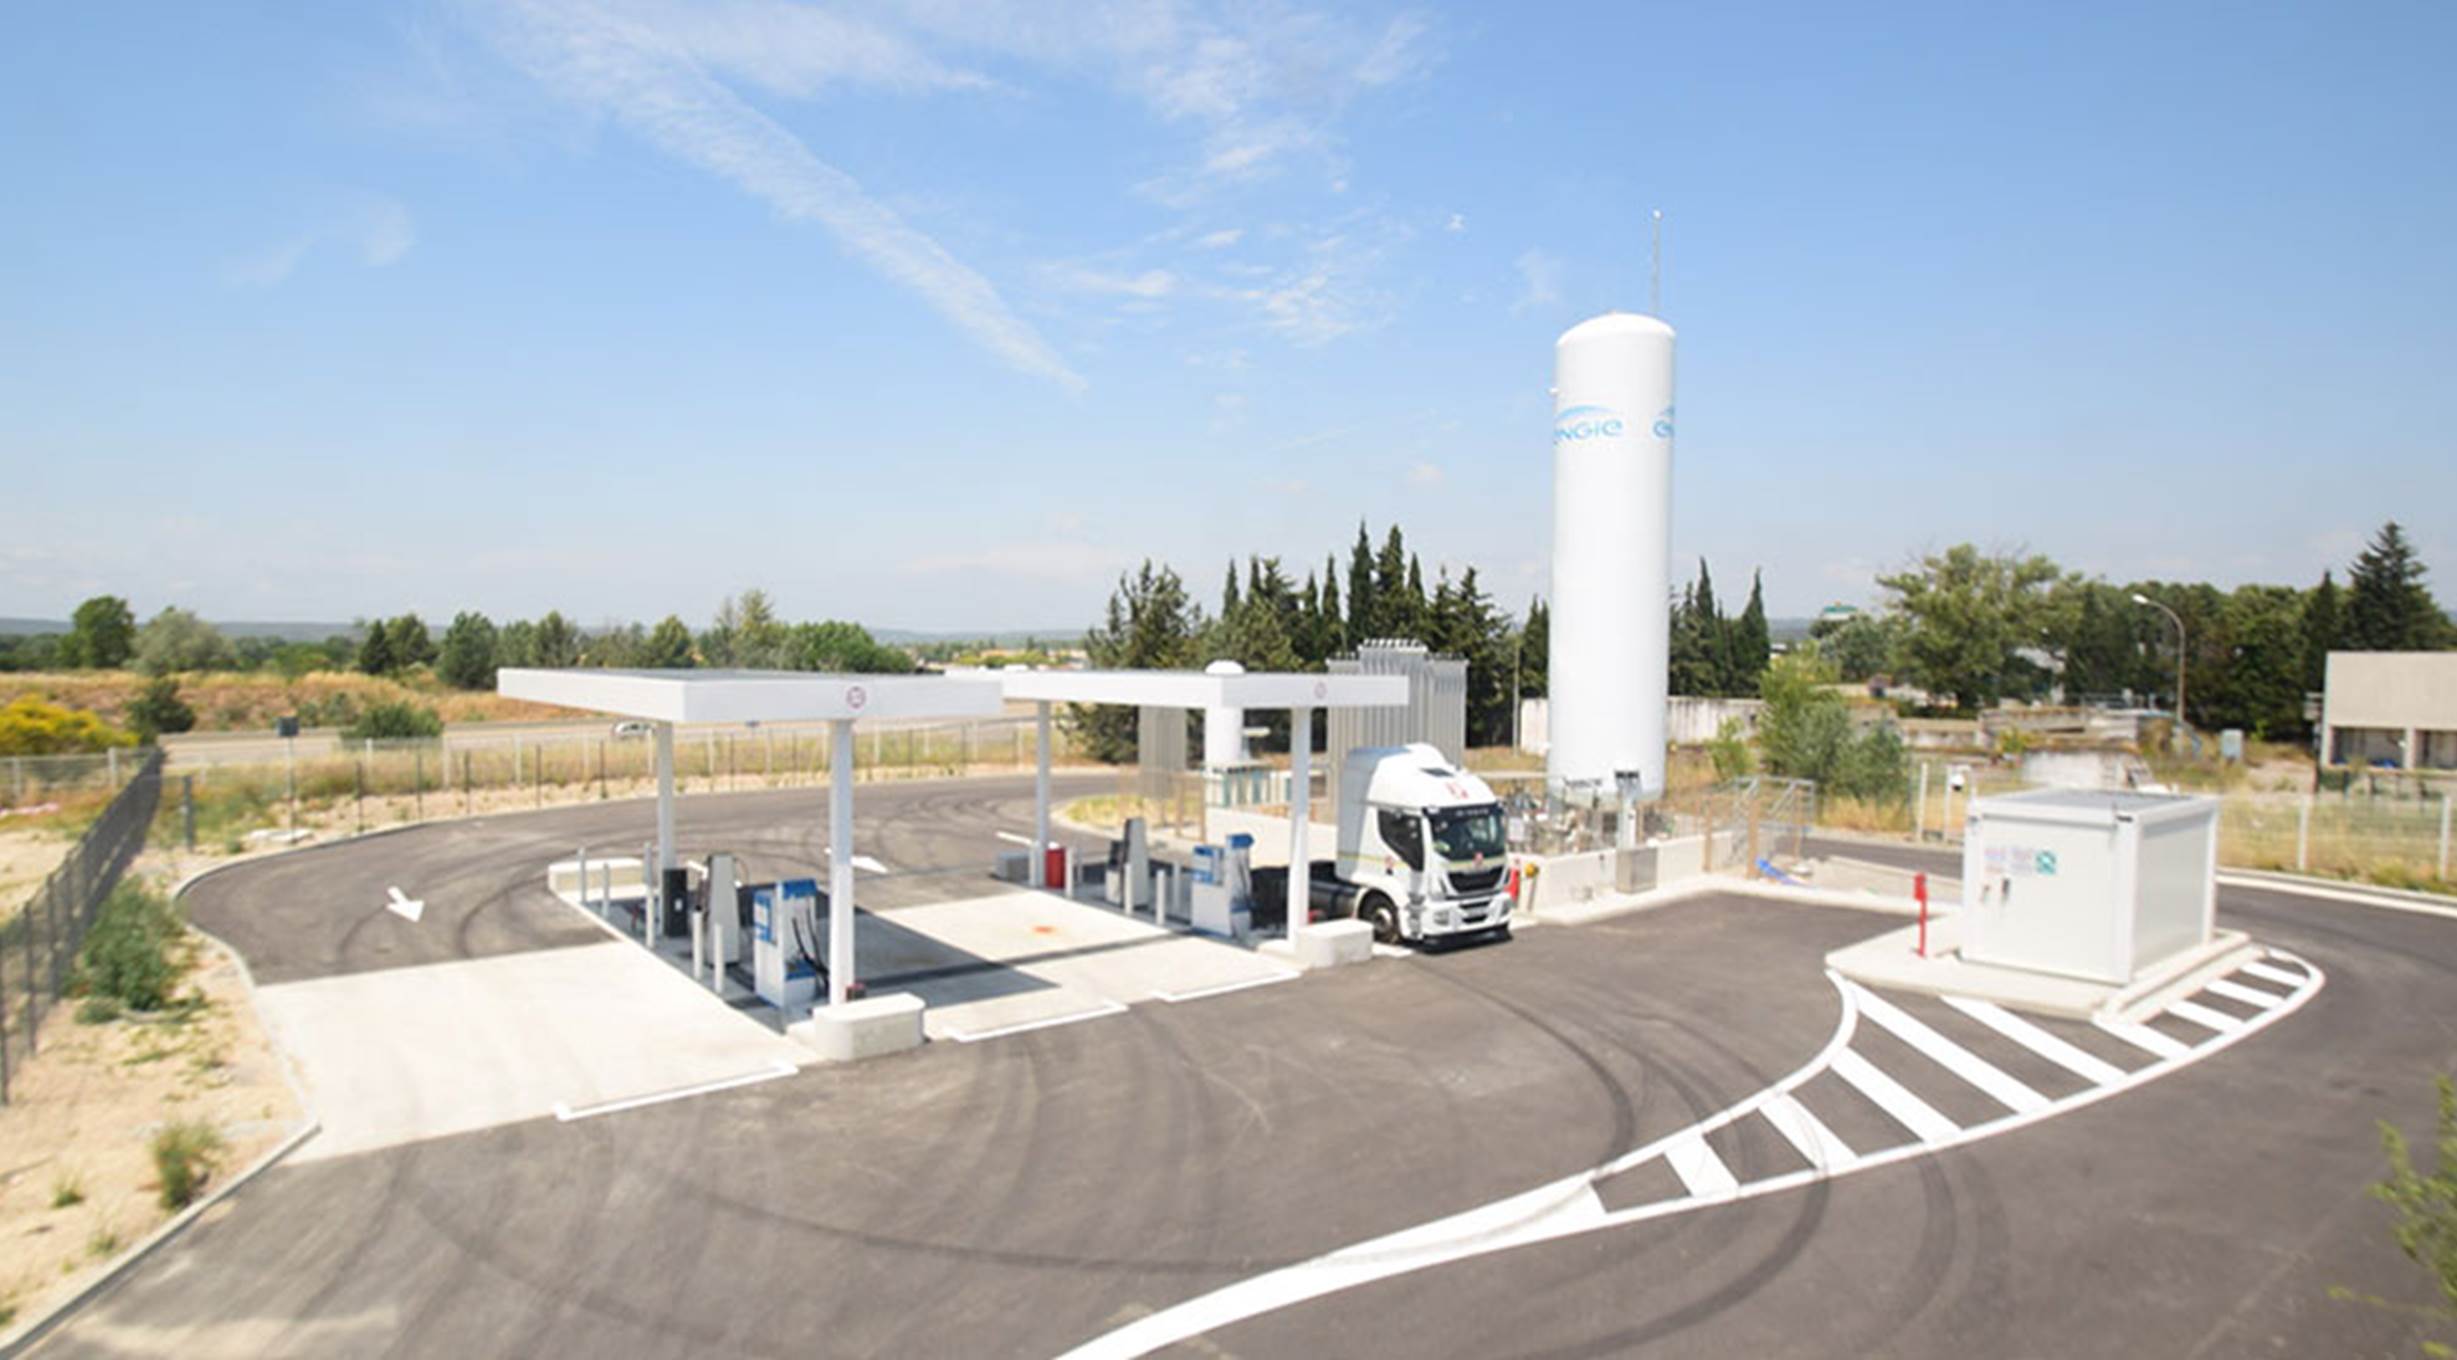 Eighth LNG station by GNVert (Engie Group) in Aix-en-Provence (France)